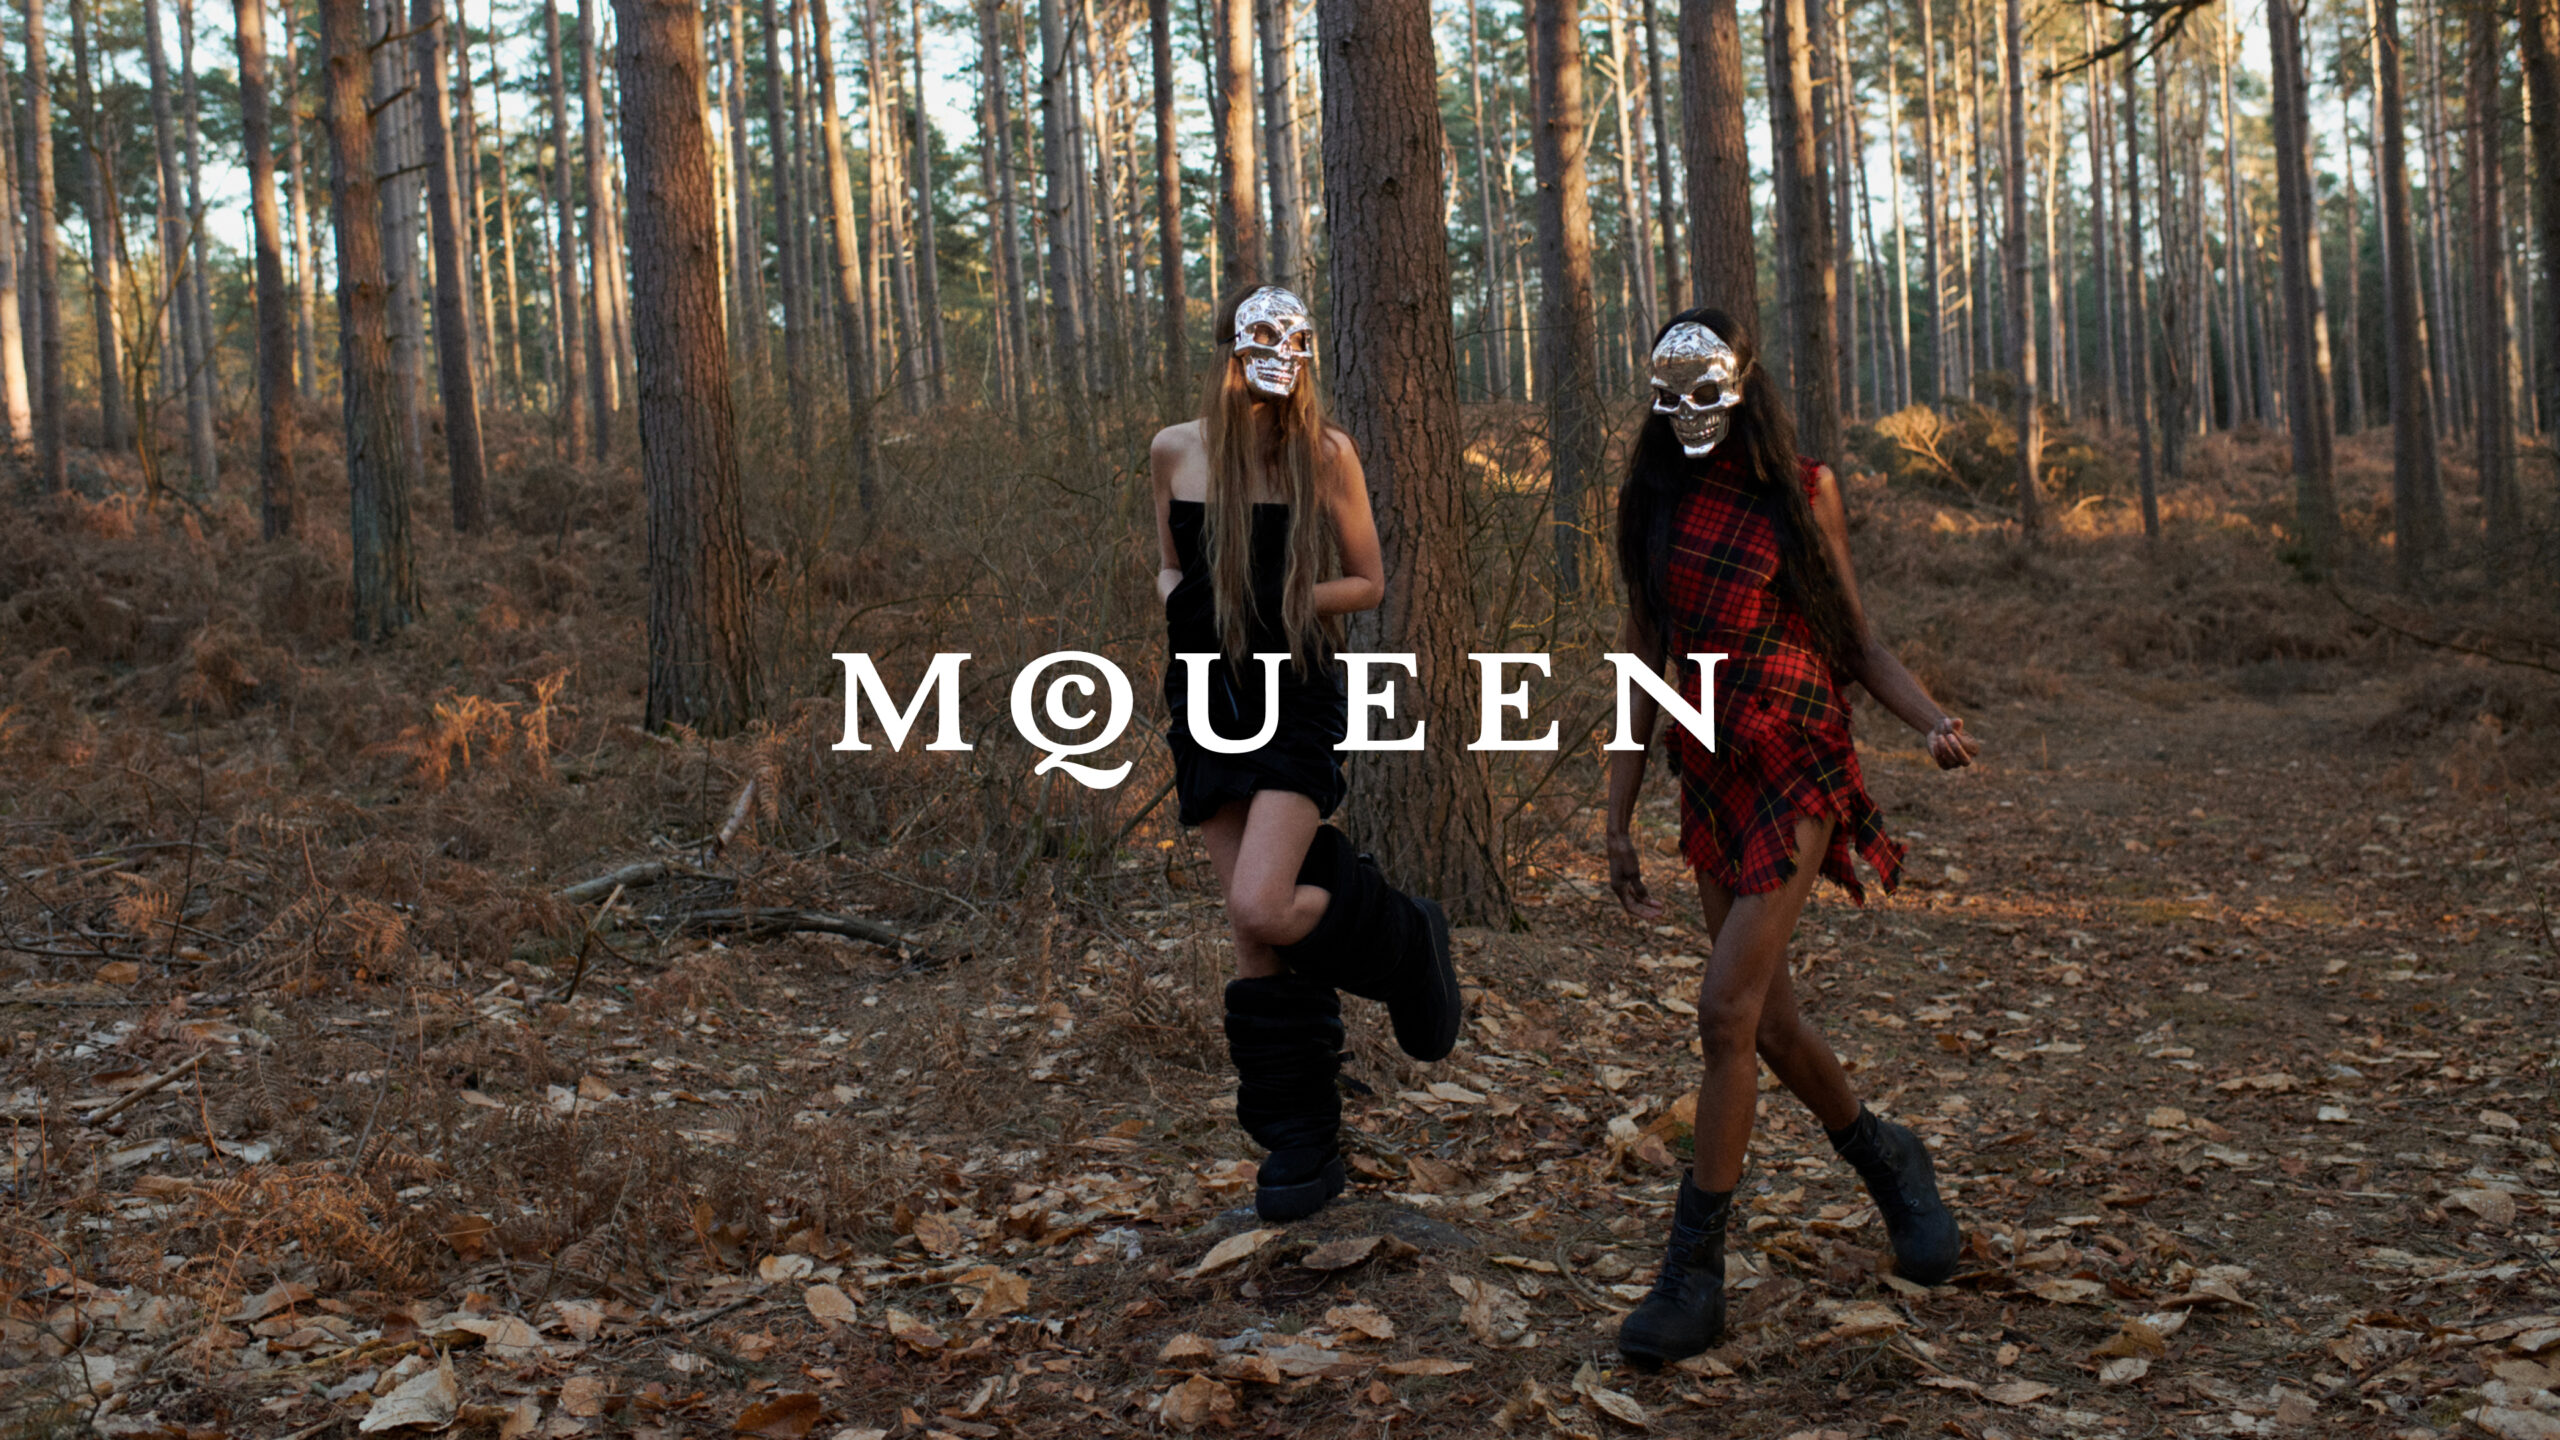 Two models in a forest, both wearing skull masks and stylish outfits, with the word "McQueen" in large, serif font at the center.